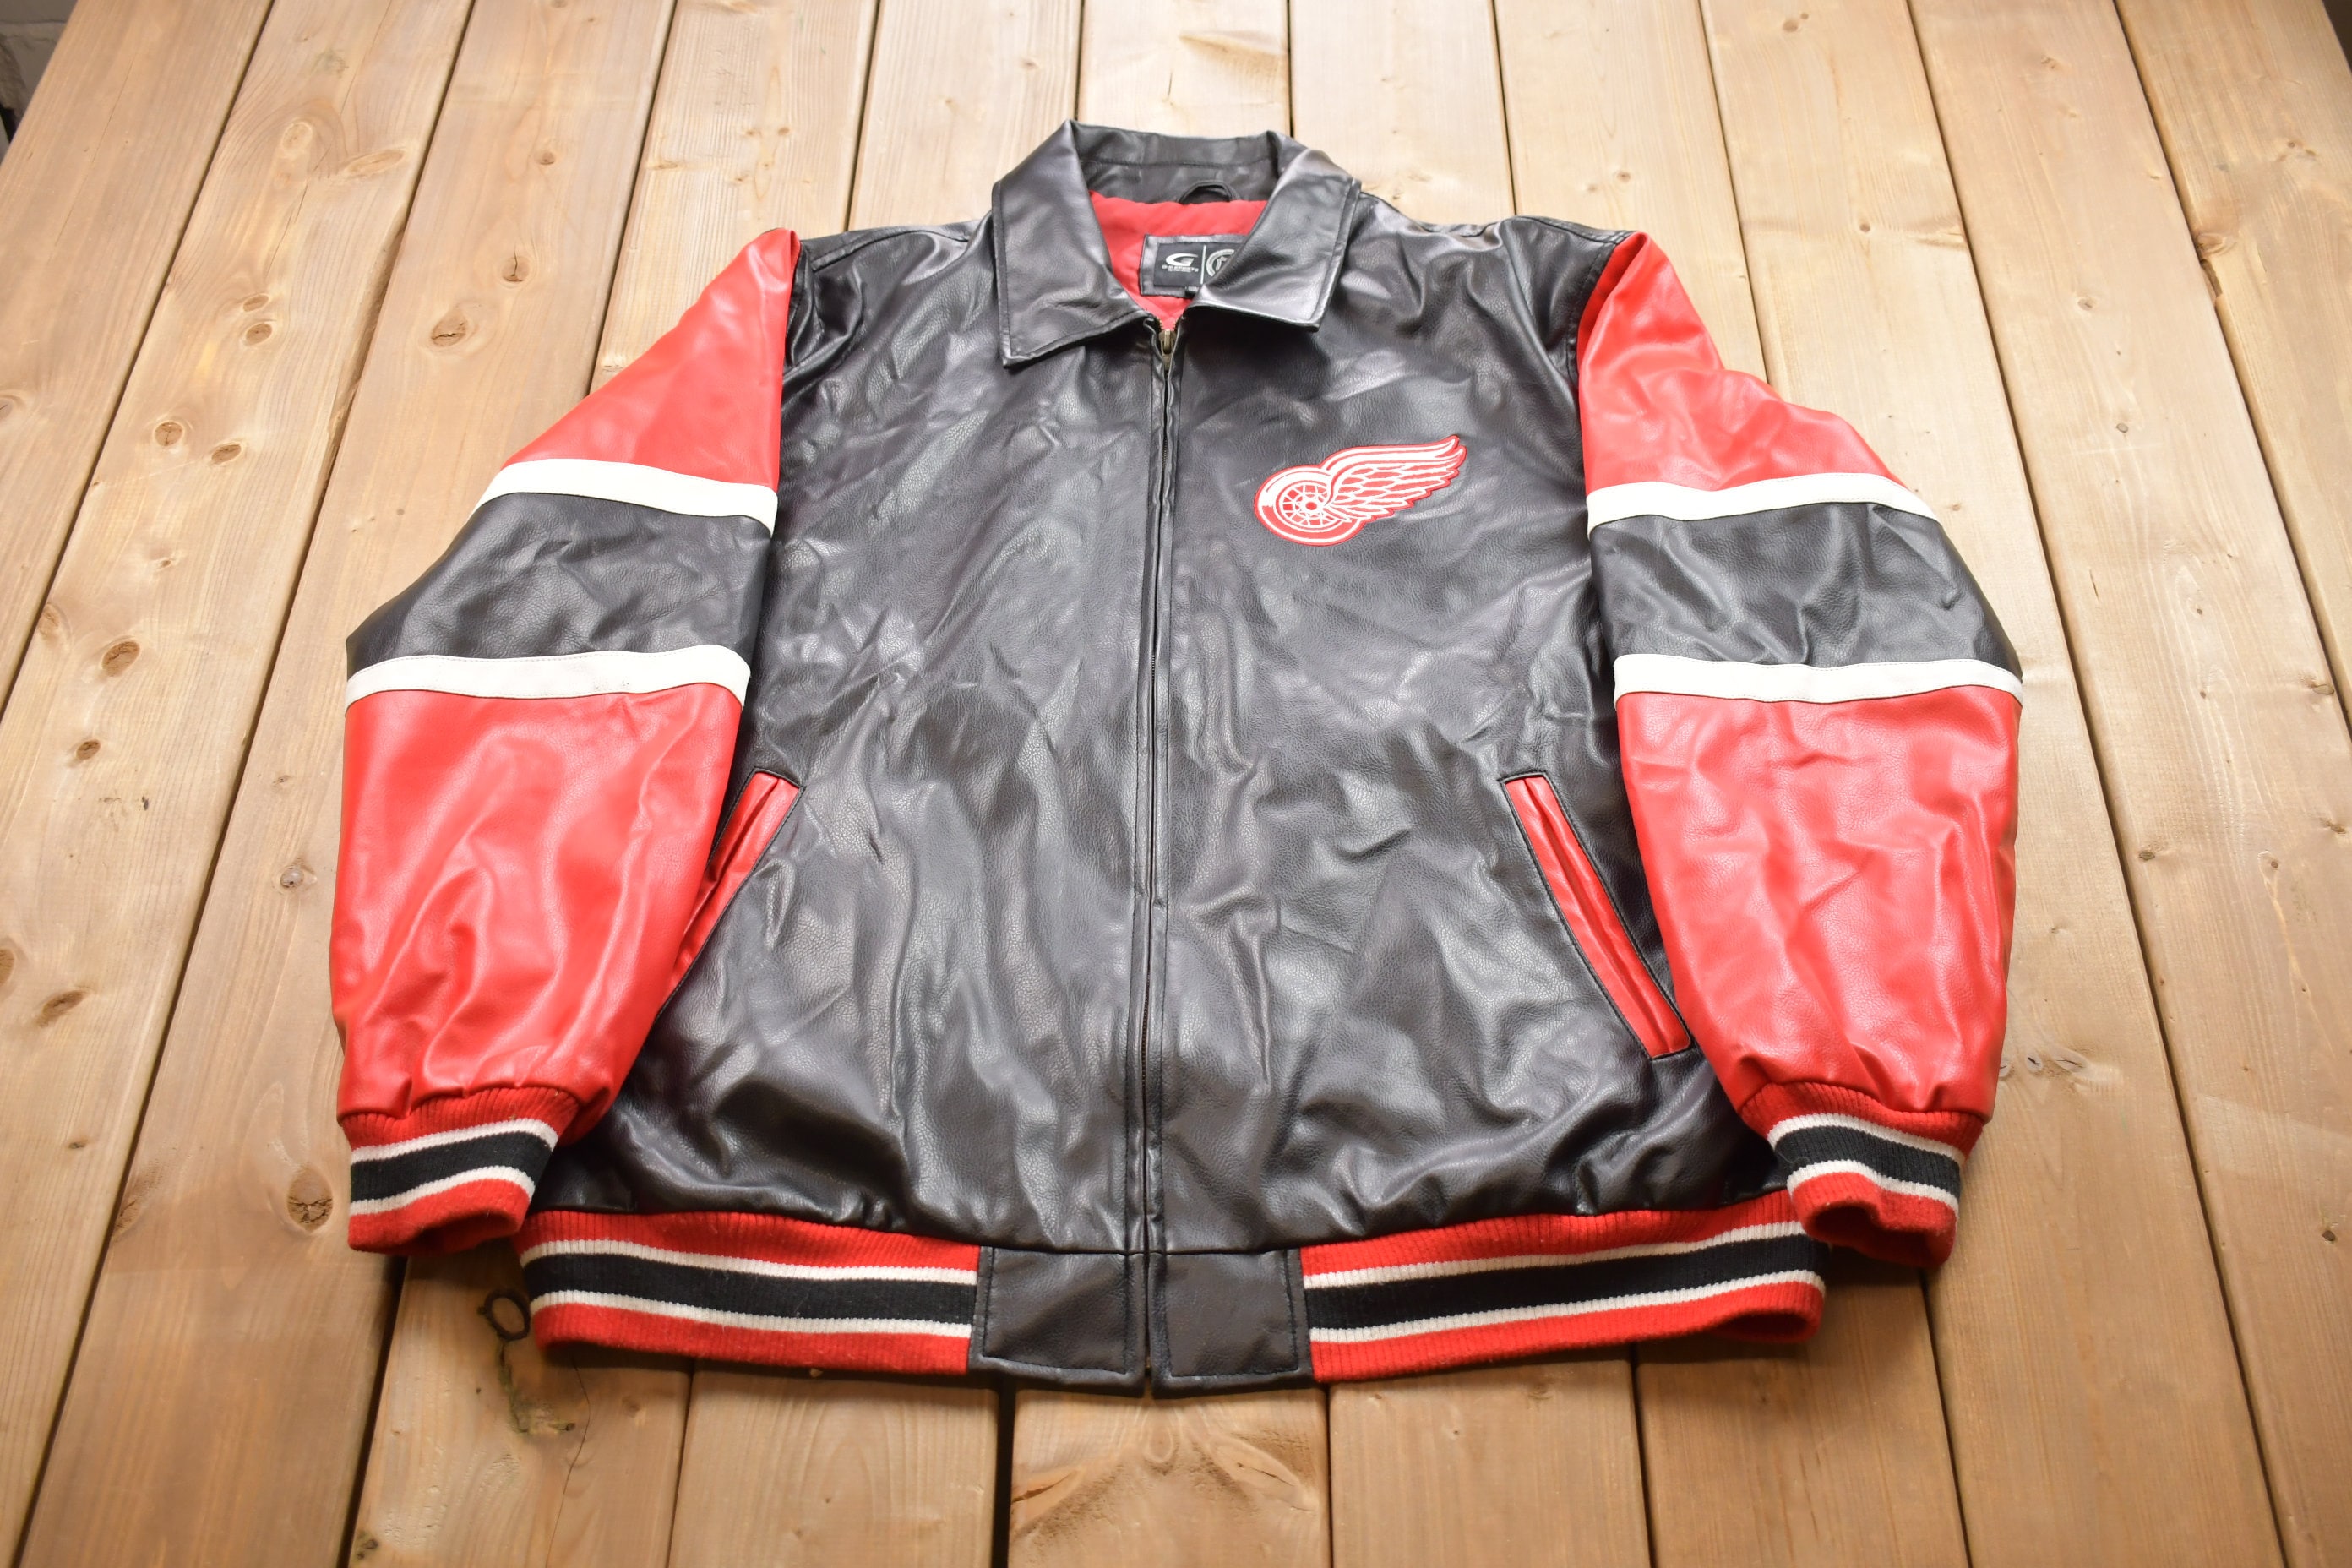 Vintage NHL (Pro Player) - Detroit Red Wings Genuine Leather Jacket 1990s X-Large